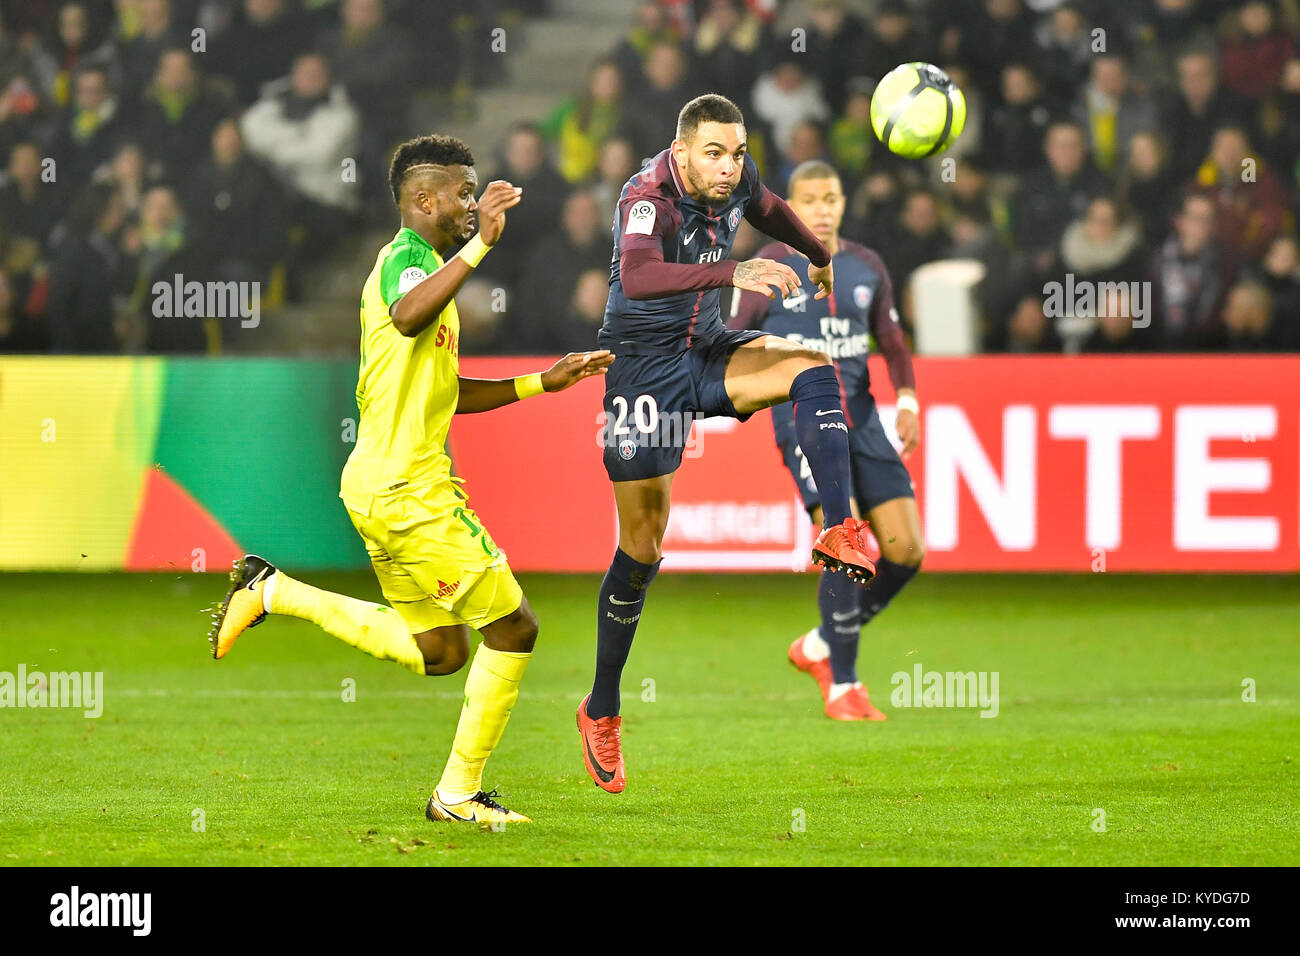 Nantes. 14th Jan, 2018. Chidozie Awaziem (L) from Nantes competes with Kylian Mbappe from Paris Saint-Germain during the match between Nantes and Paris Saint-Germain of French Ligue 1 2017-2018 season round 20 in Nantes, France on Jan. 14, 2018. Paris Saint-Germain won 1-0. Credit: Chen Yichen/Xinhua/Alamy Live News Stock Photo